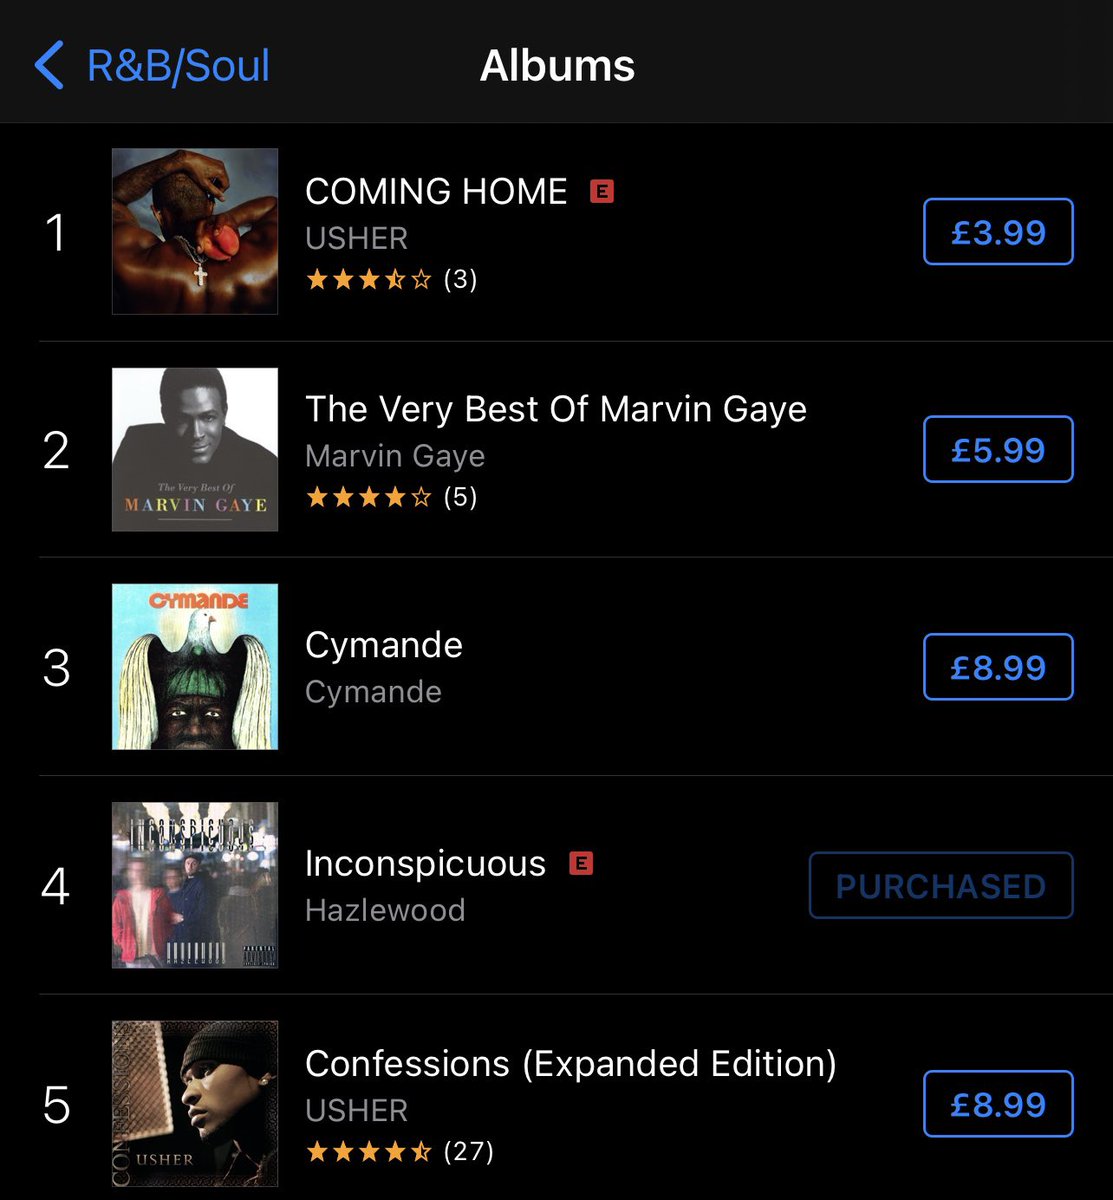 What a week! It’s a MASSIVE well done to Akayb & @hazlewood_uk both hitting number 4 on the iTunes chart with their latest releases! Check out Stargazing and Inconspicuous on all streaming and download platforms worldwide! SO proud of you both ❤️ #AECMusic #Akayb #Hazlewood